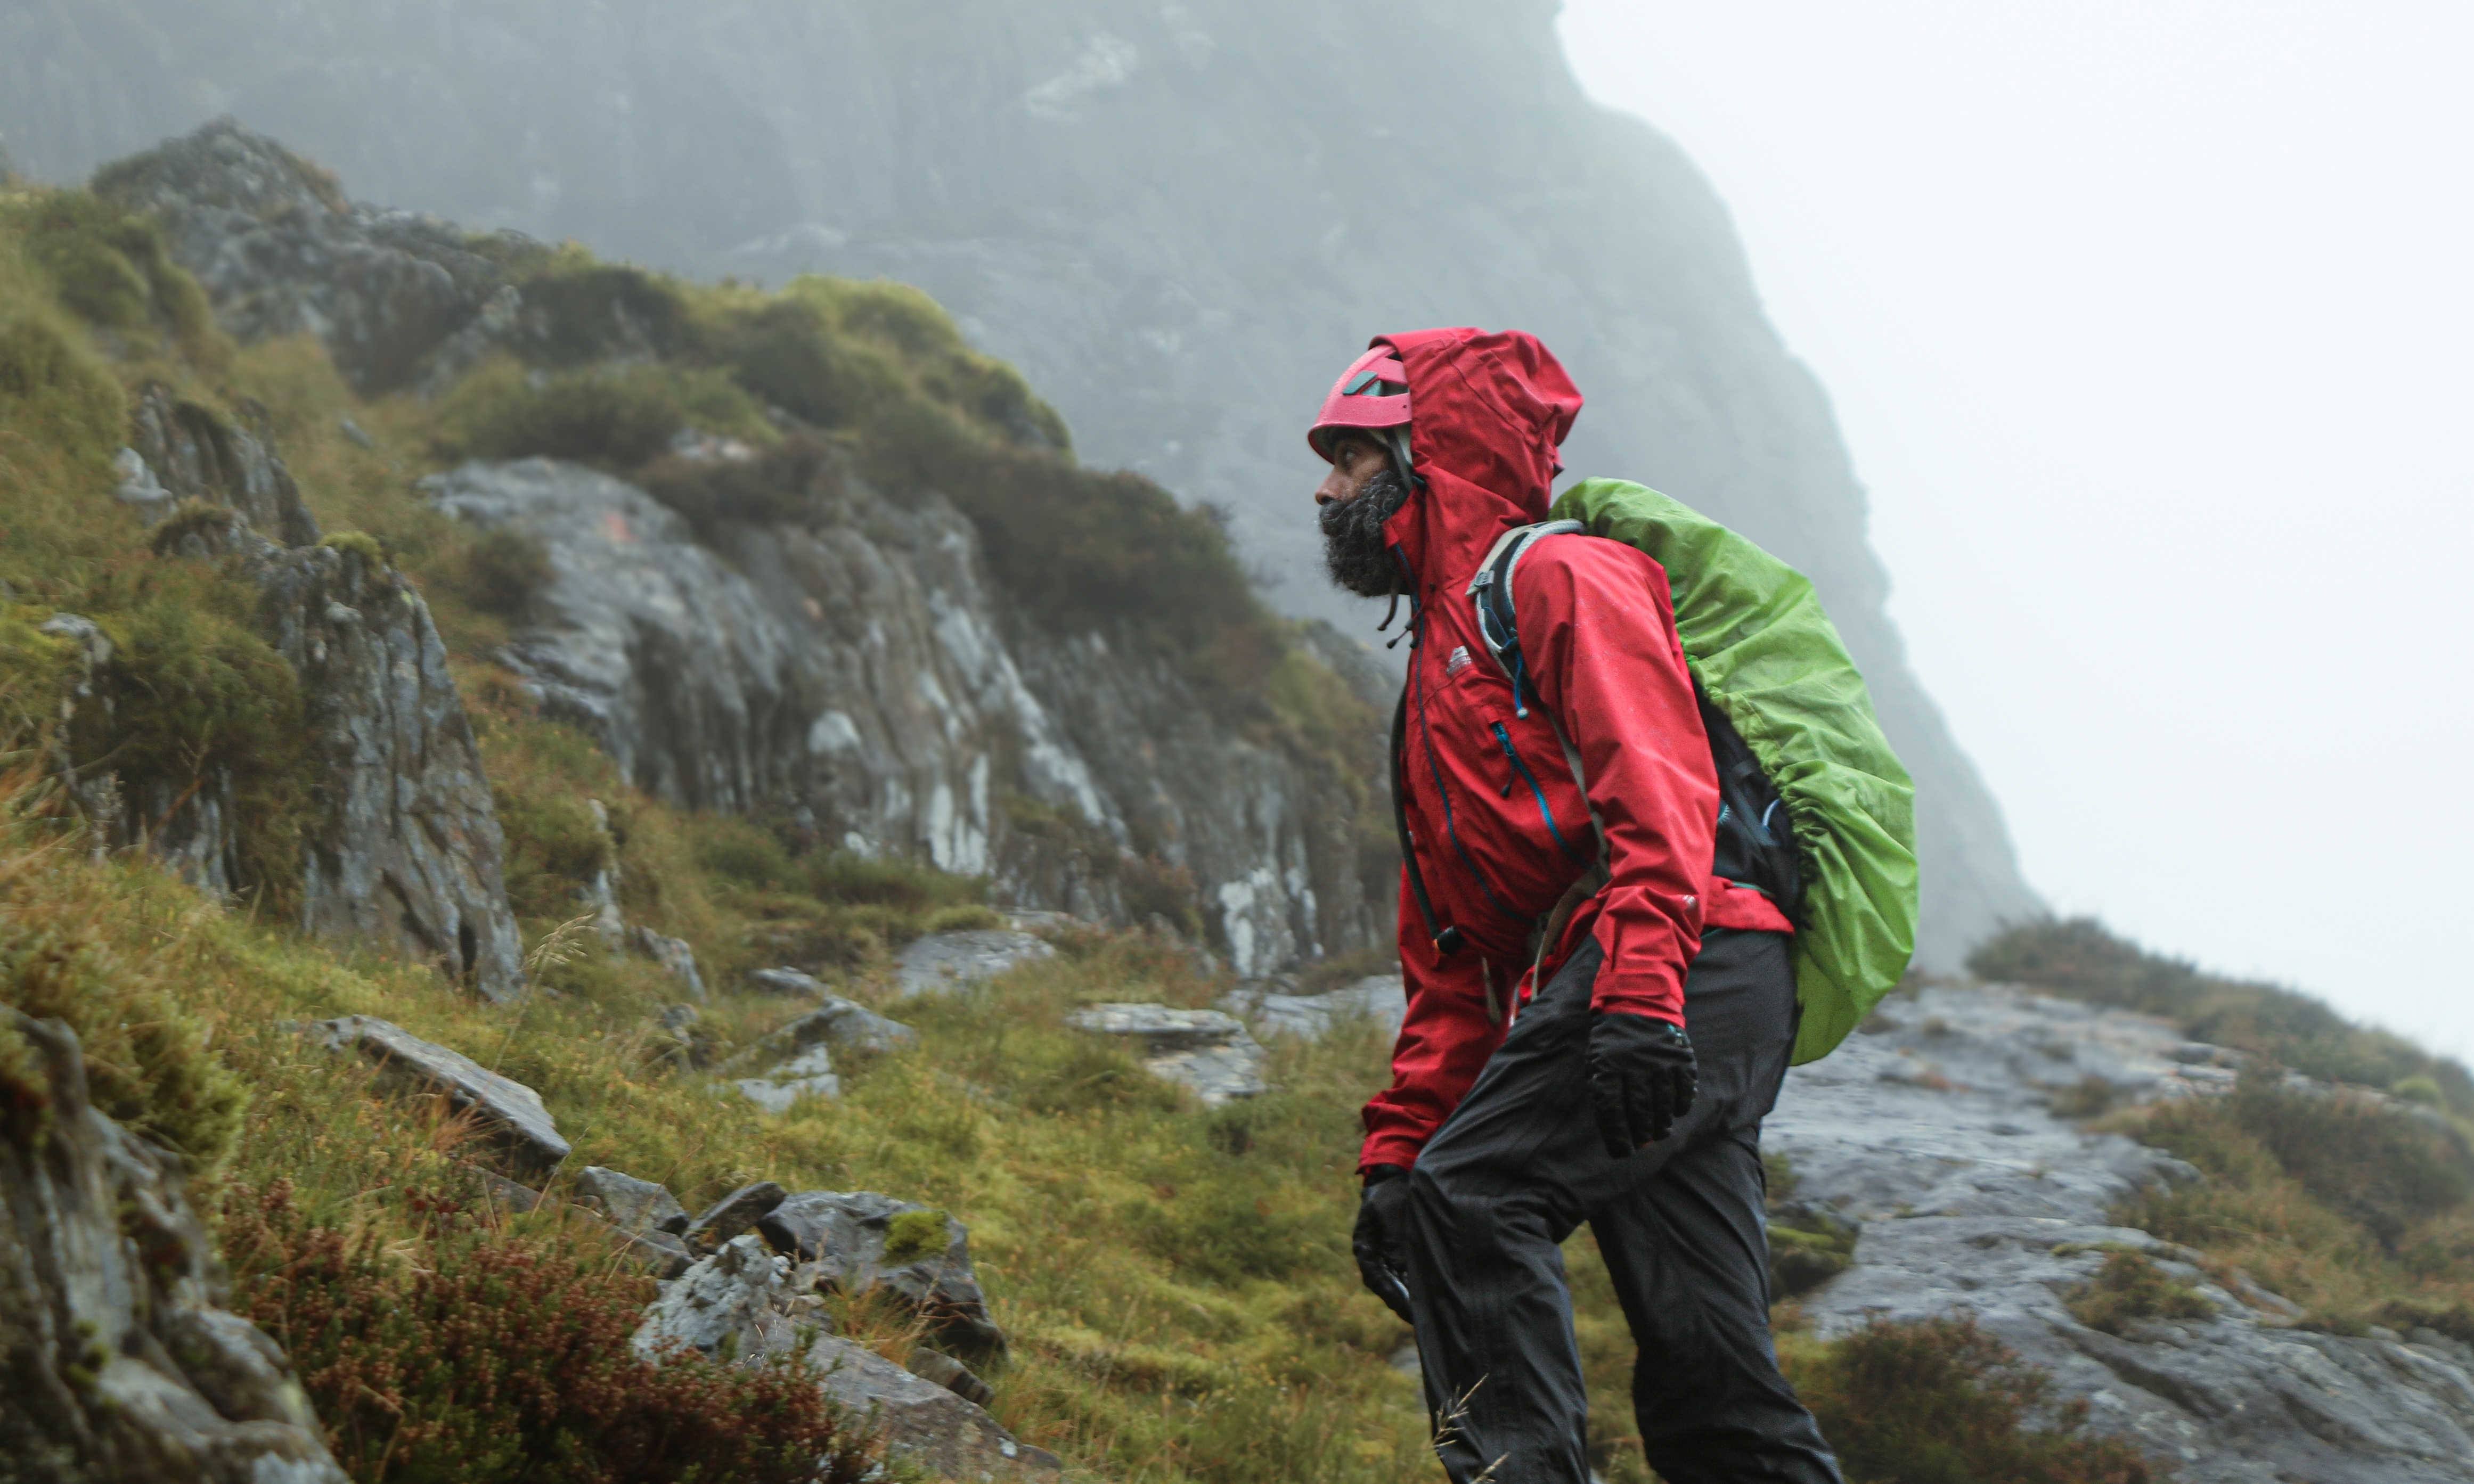 A man of central Asian heritage wearing a helmet and waterproofs prepares to start scrambling